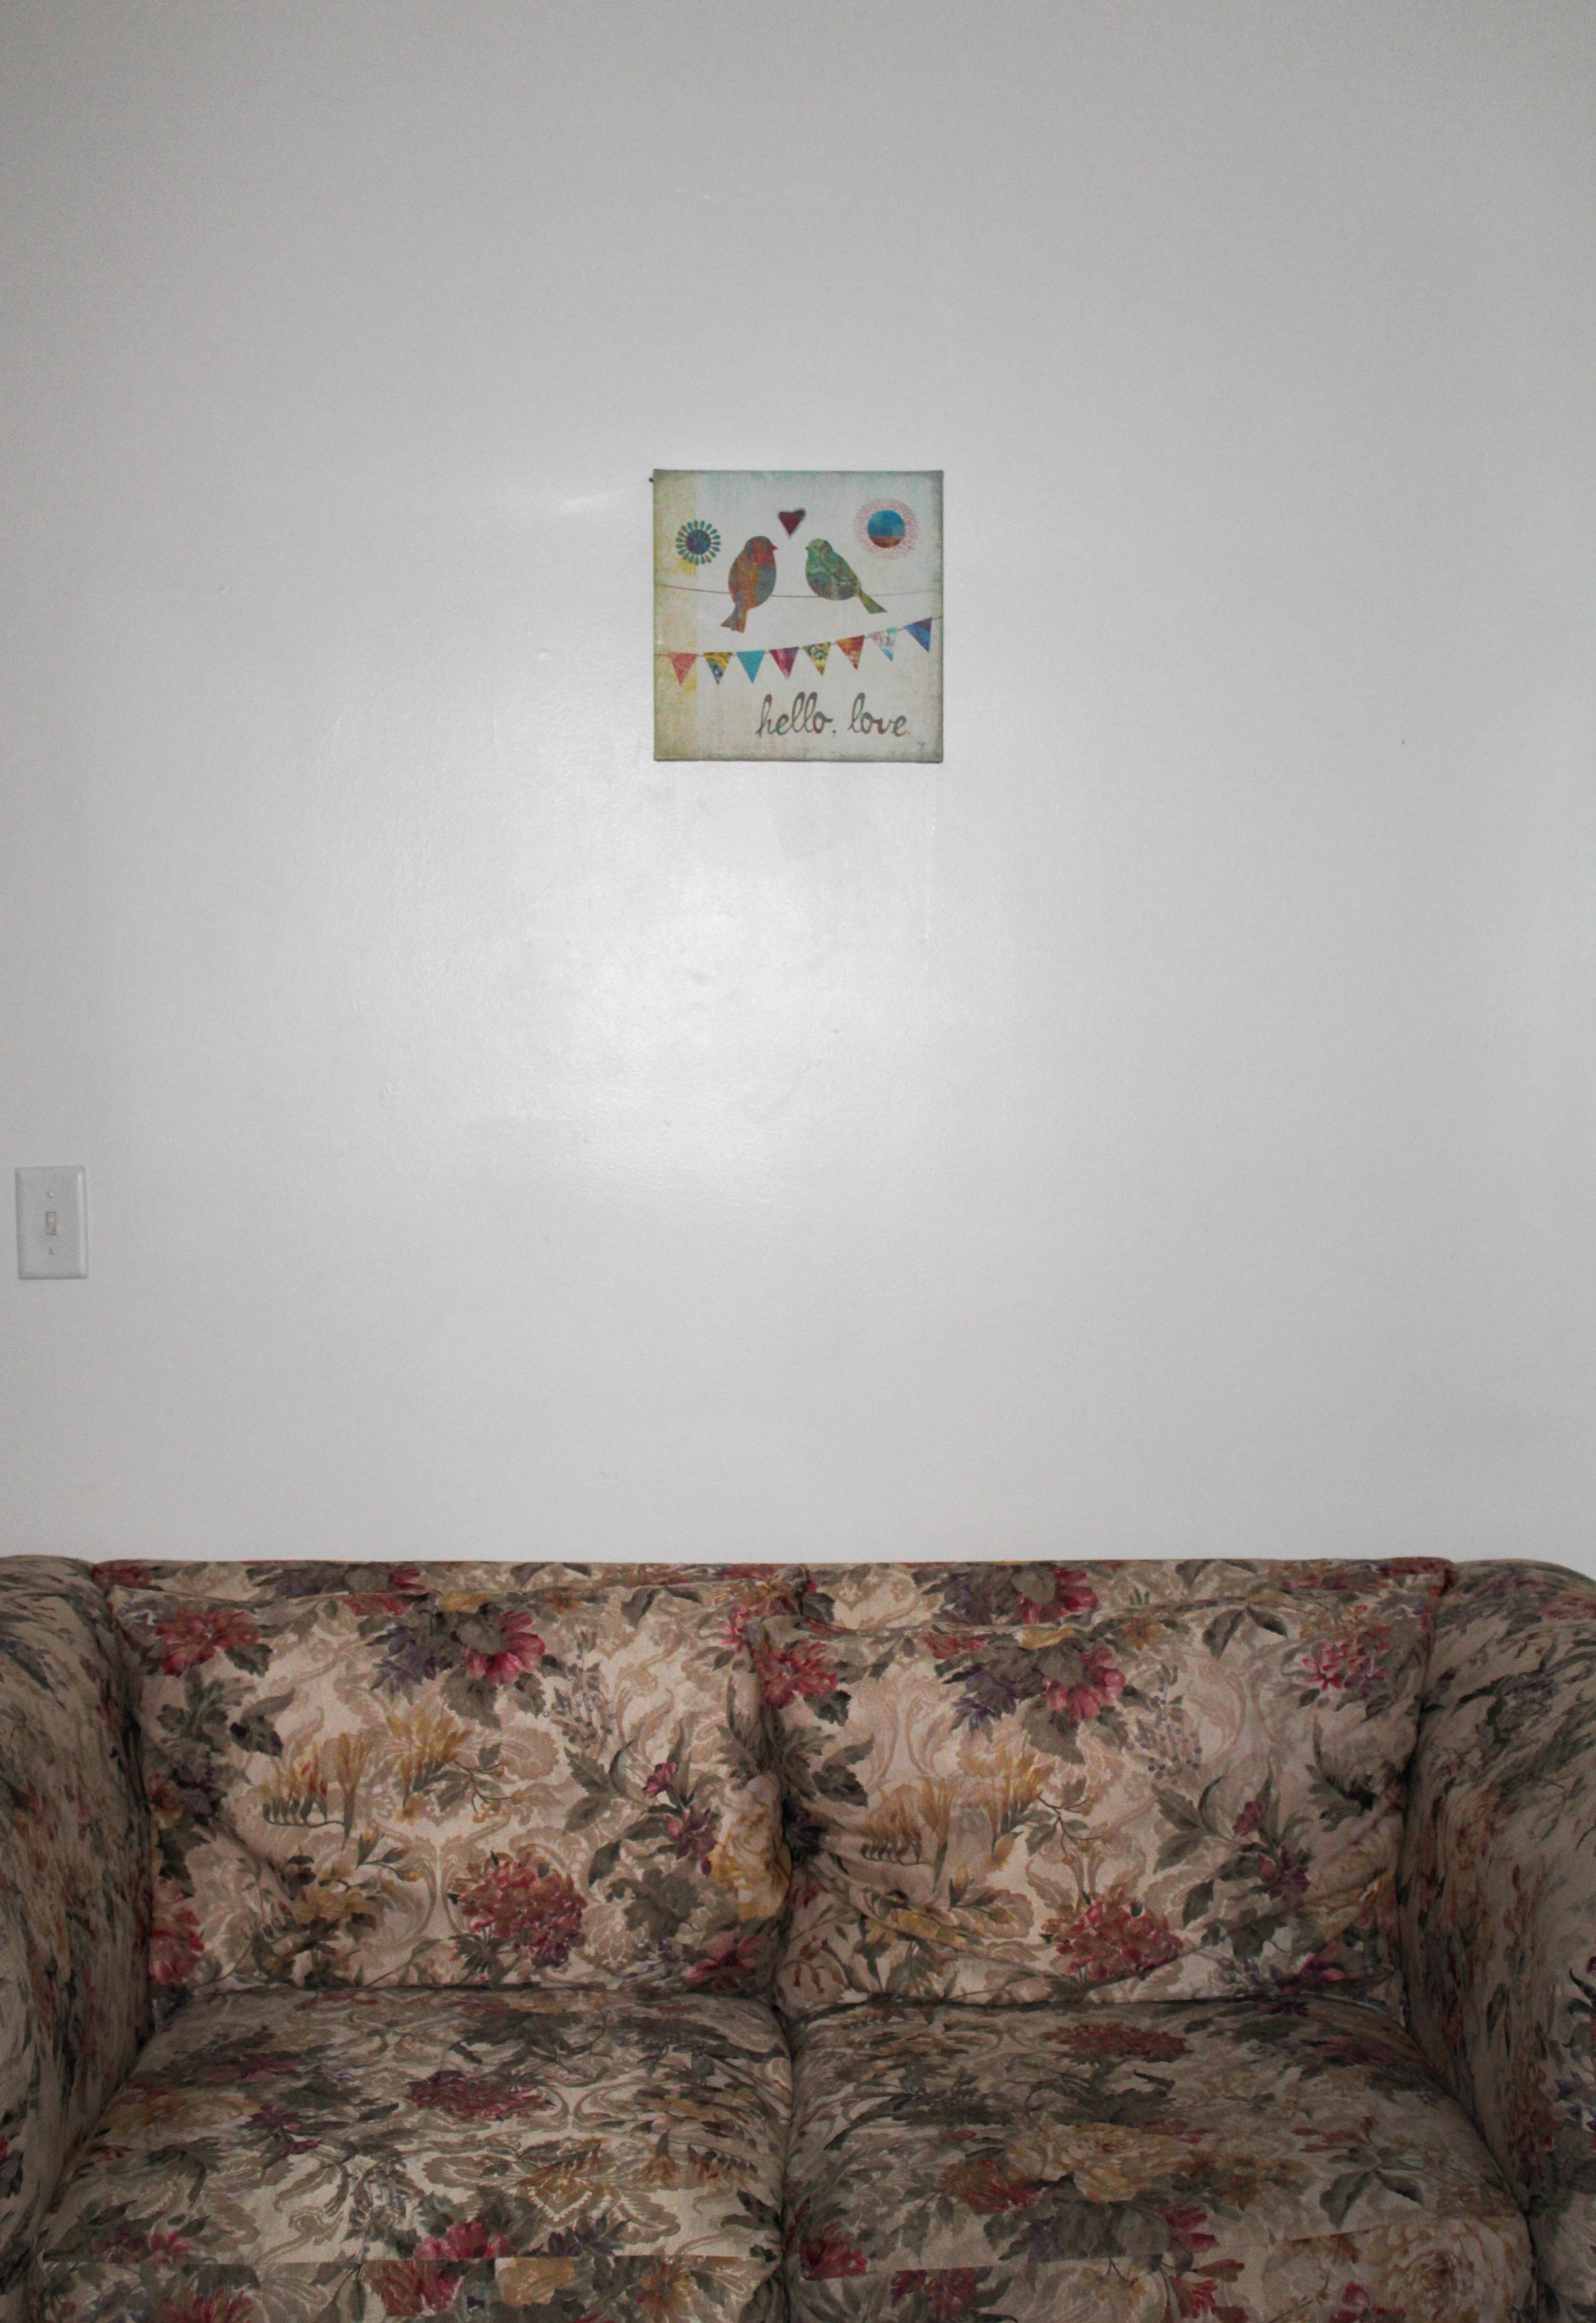 In a house on campus, the girls have a couch and wall art to make the room feel more like home.